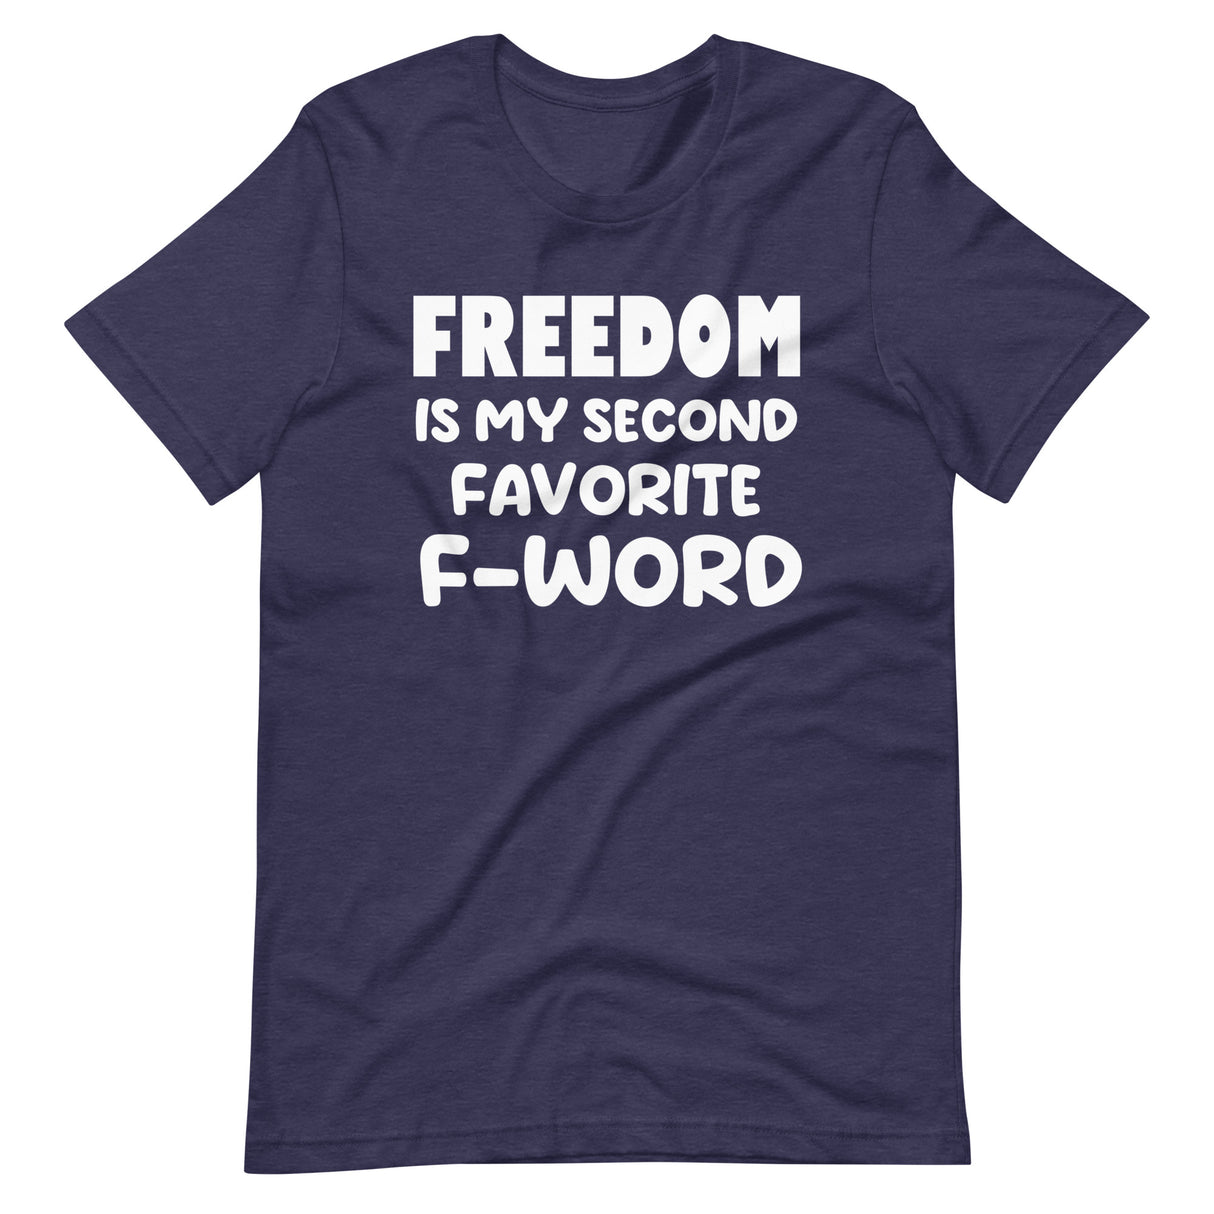 Freedom is My Second Favorite F-Word Shirt - Libertarian Country